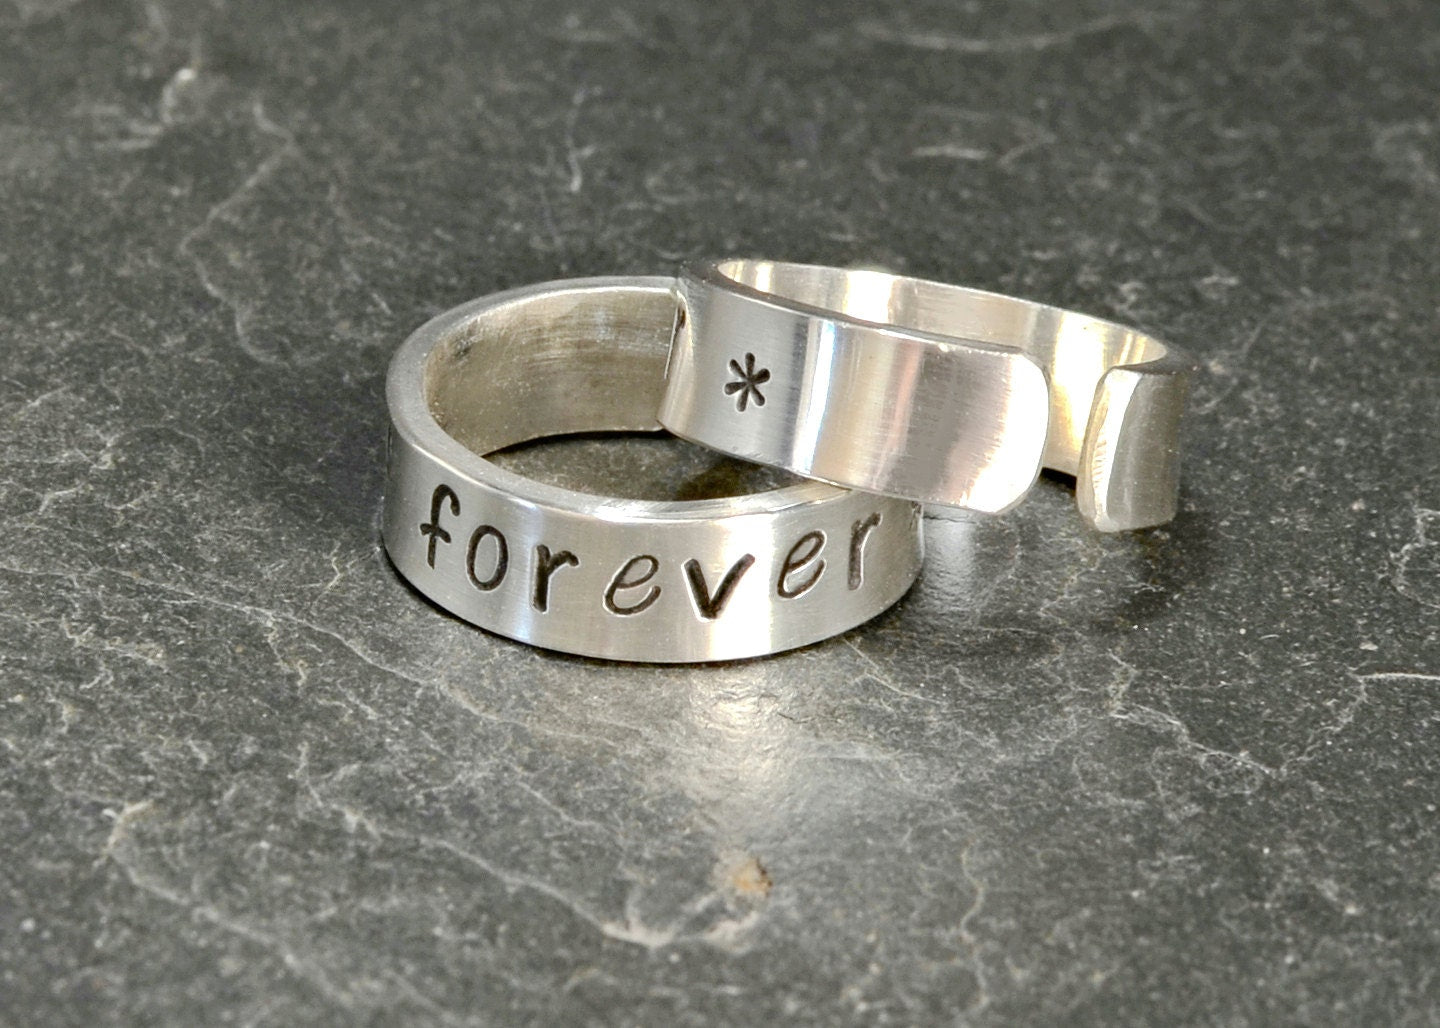 Best Friends Forever Sterling Silver Friendship Ring Set in adjustable open style